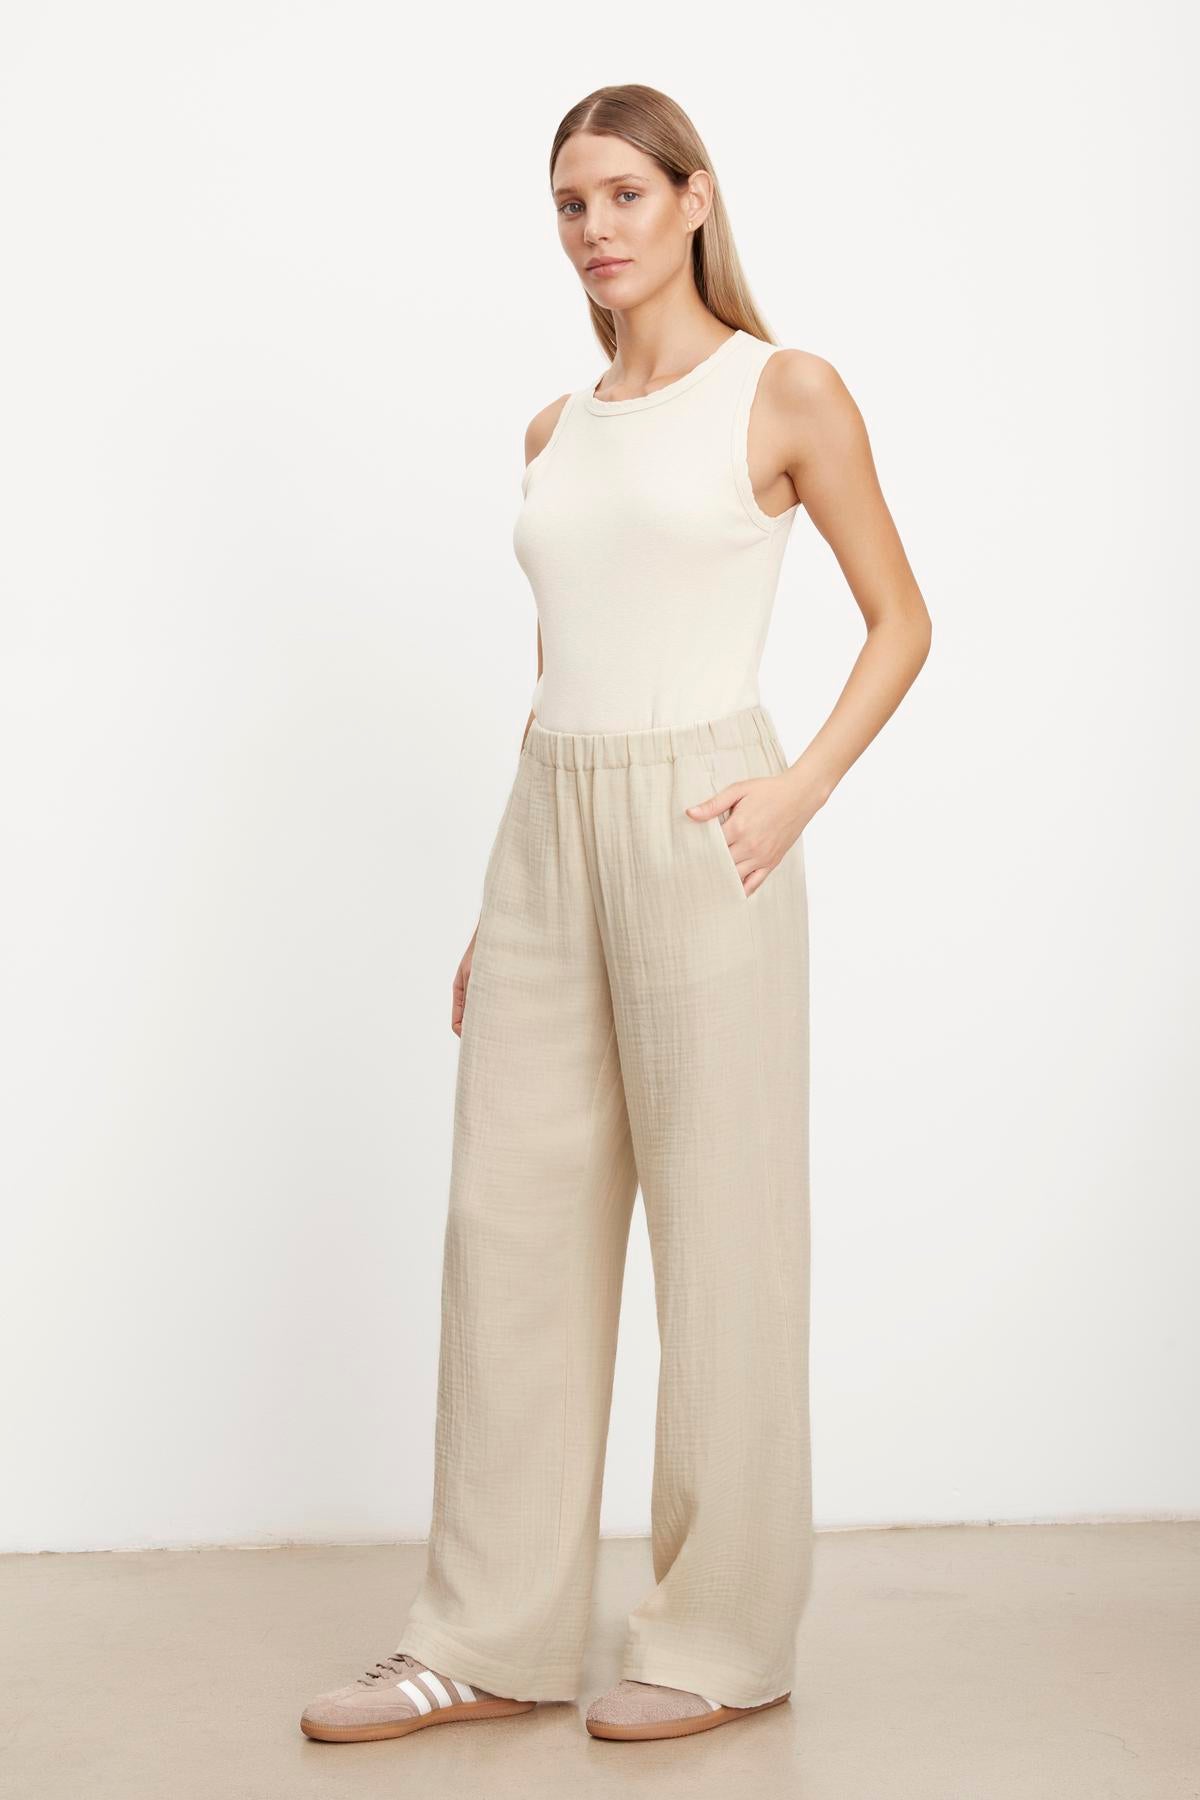   Lightweight Jerry Cotton Gauze pant in beige with an elastic waistband. (by Velvet by Graham & Spencer) 